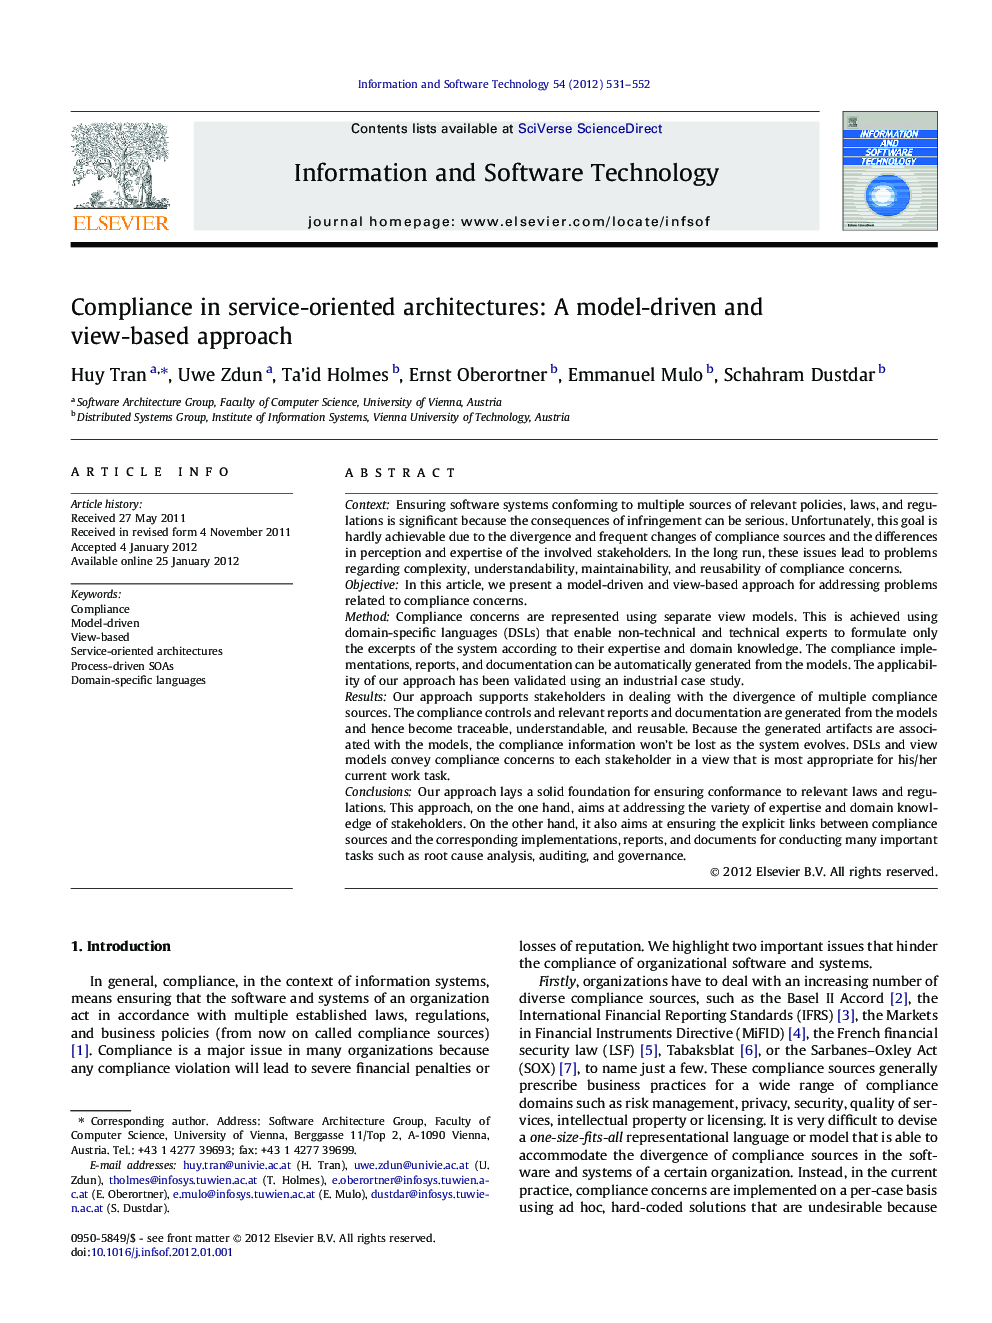 Compliance in service-oriented architectures: A model-driven and view-based approach